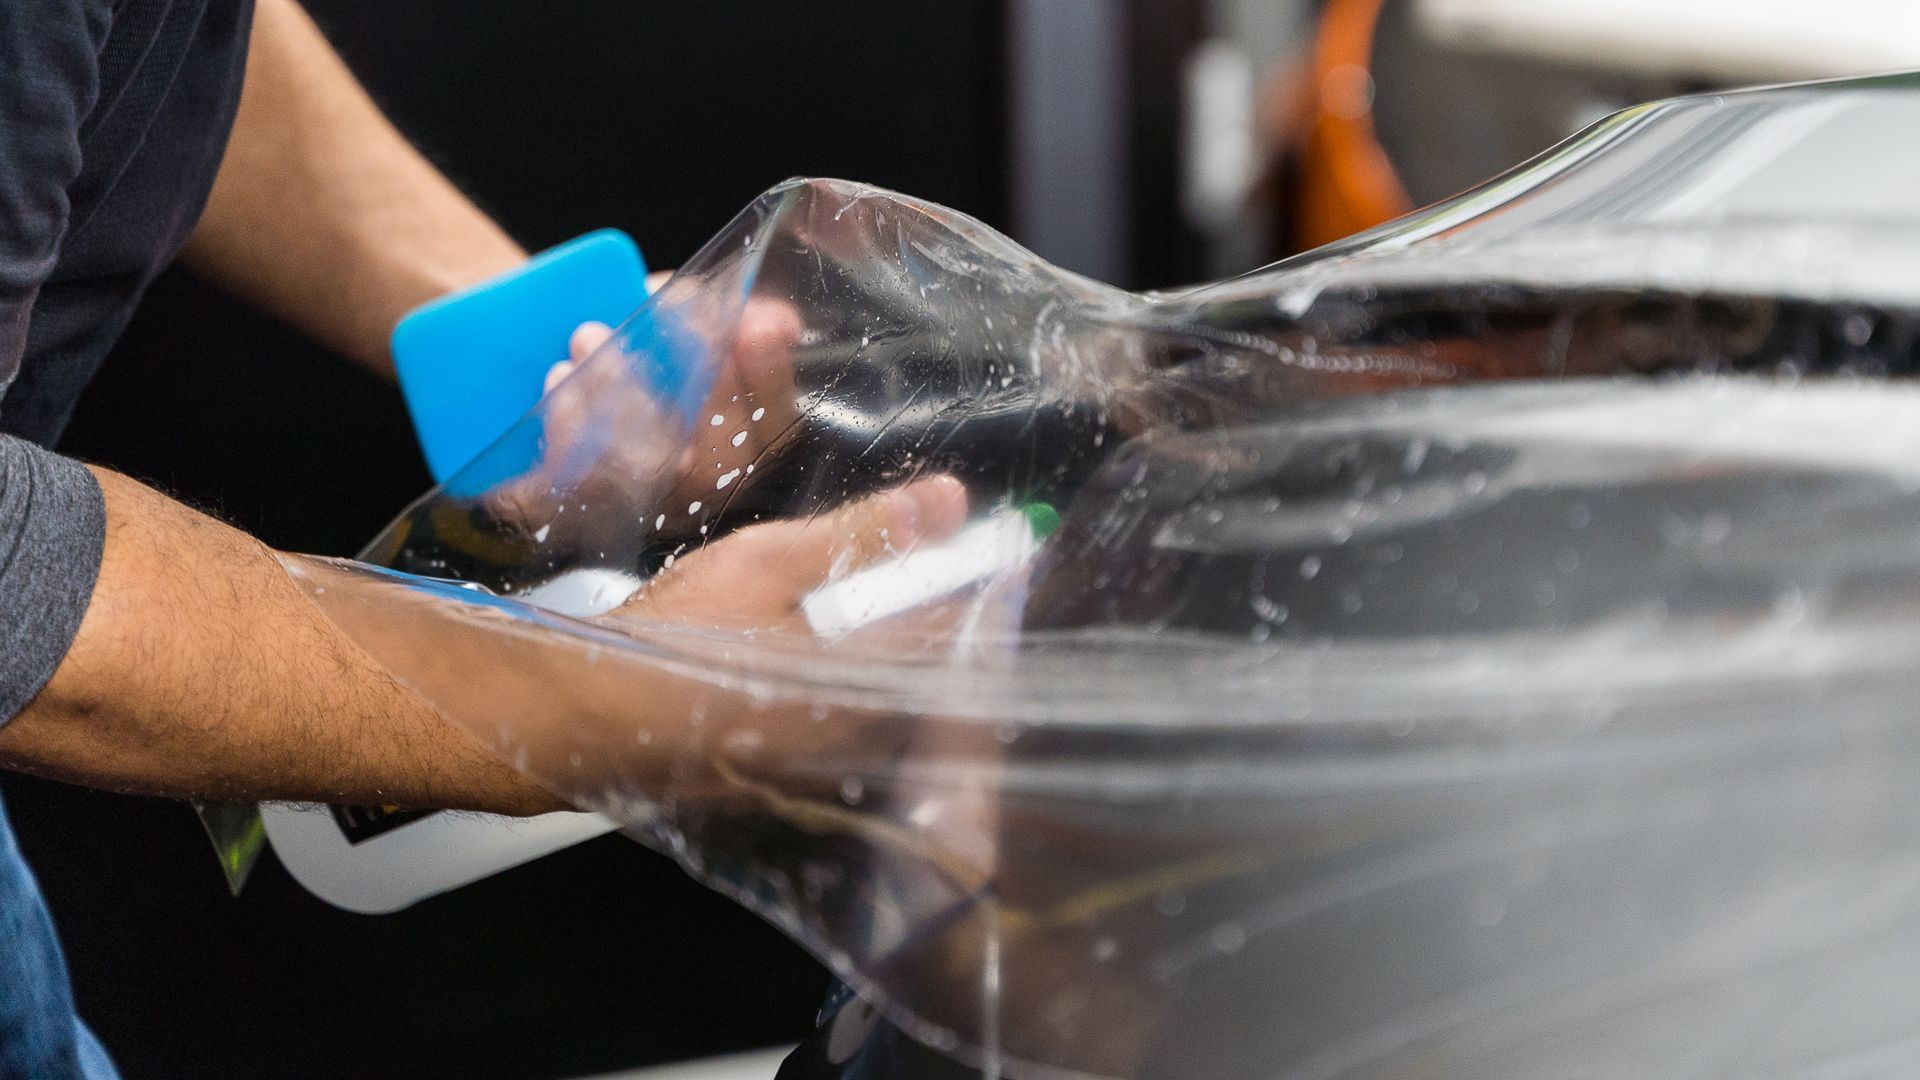 Satin Paint Protection Film - A man is wrapping a car with clear plastic